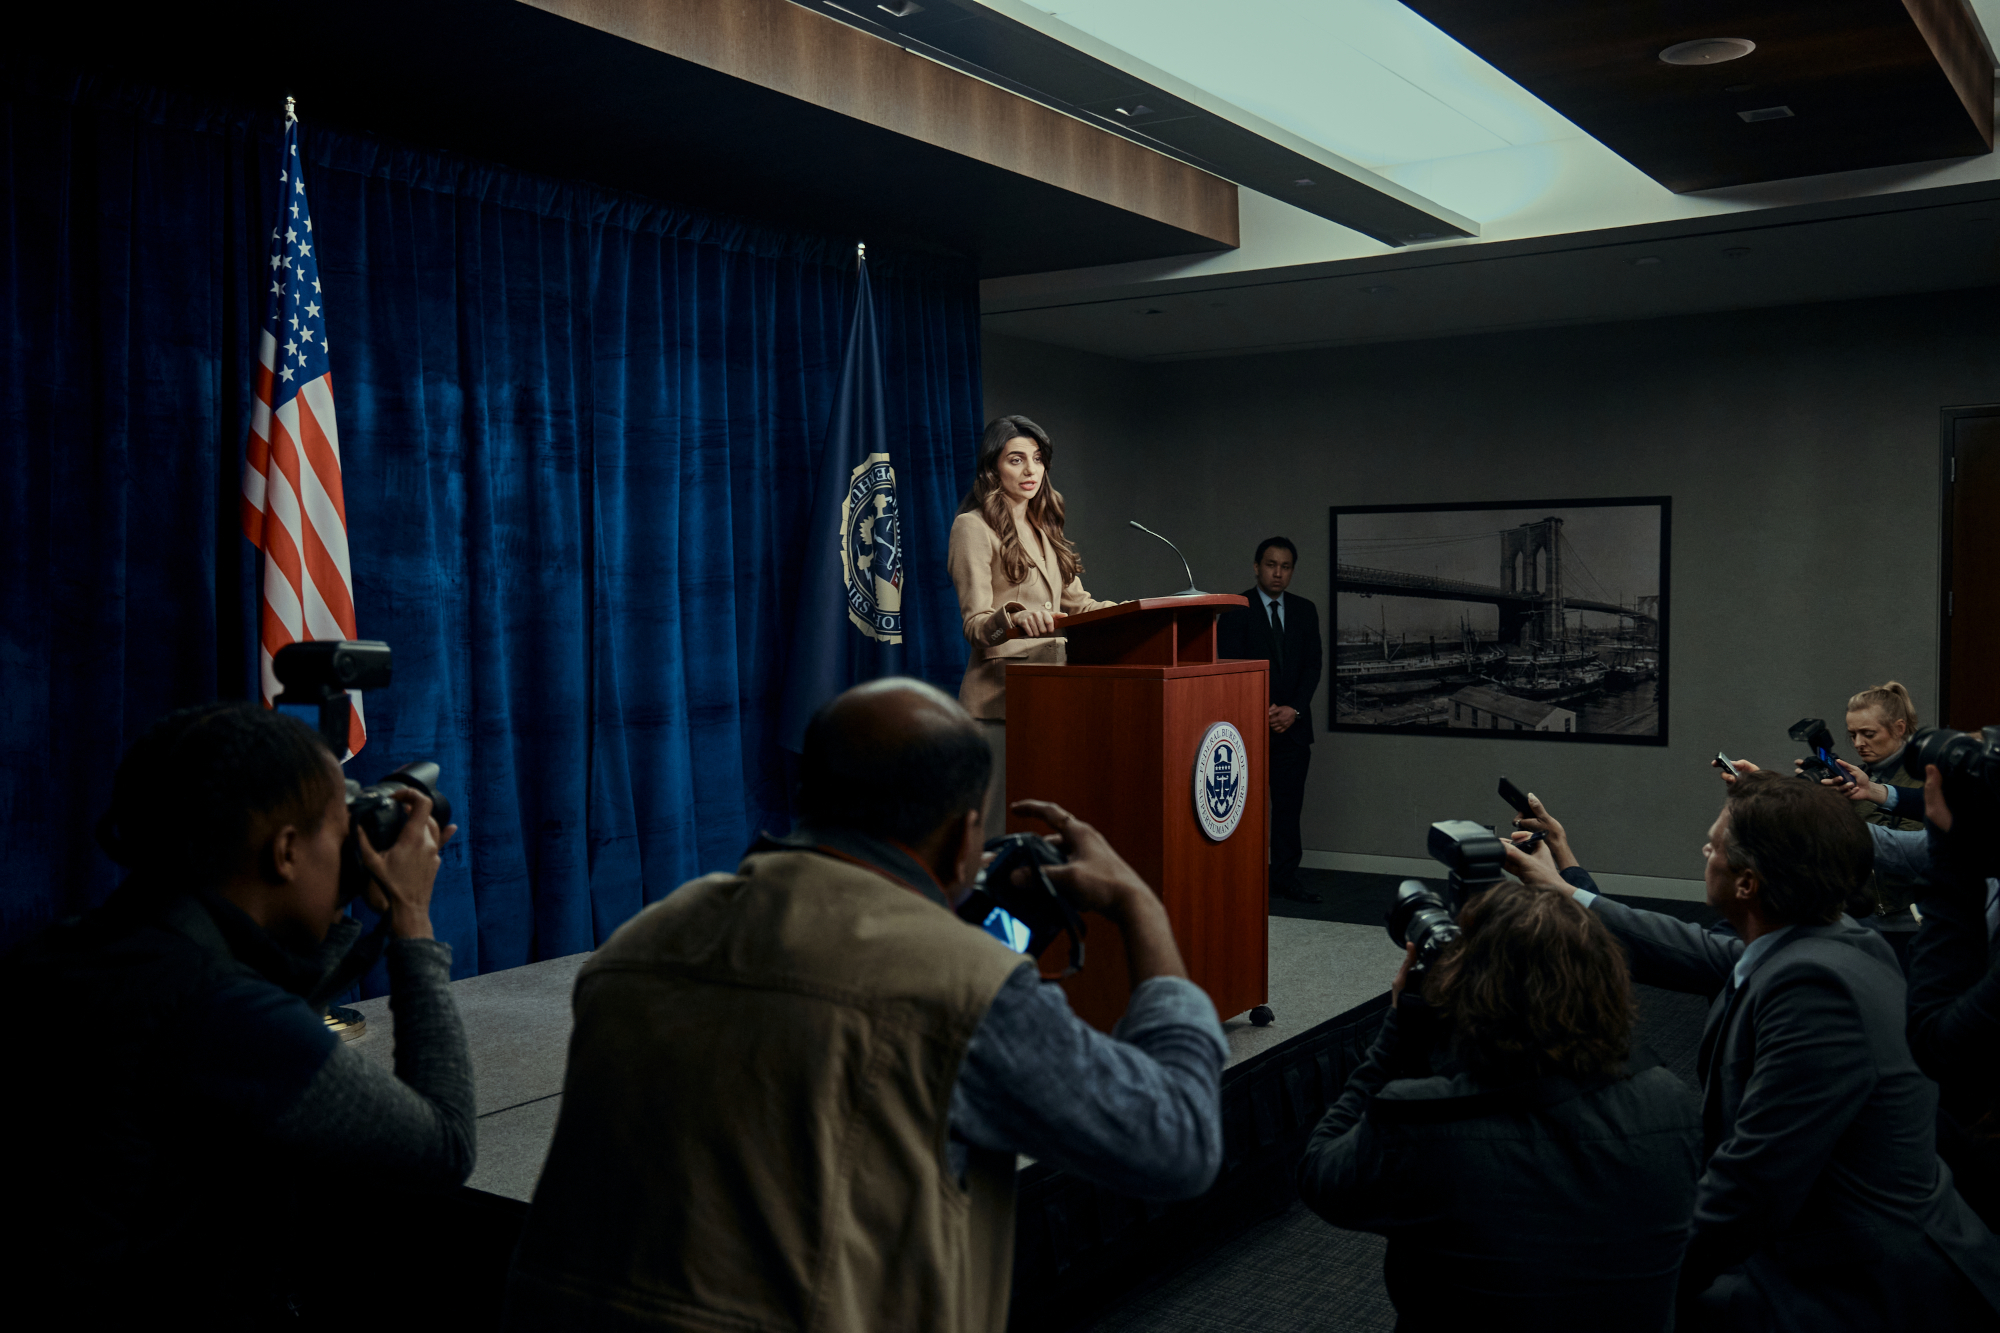 Claudia Doumit as Victoria Neuman in 'The Boys' Season 3, which has an episode 5 release date set for June 15. She's standing at a podium in front of a crowd and doing a press conference.